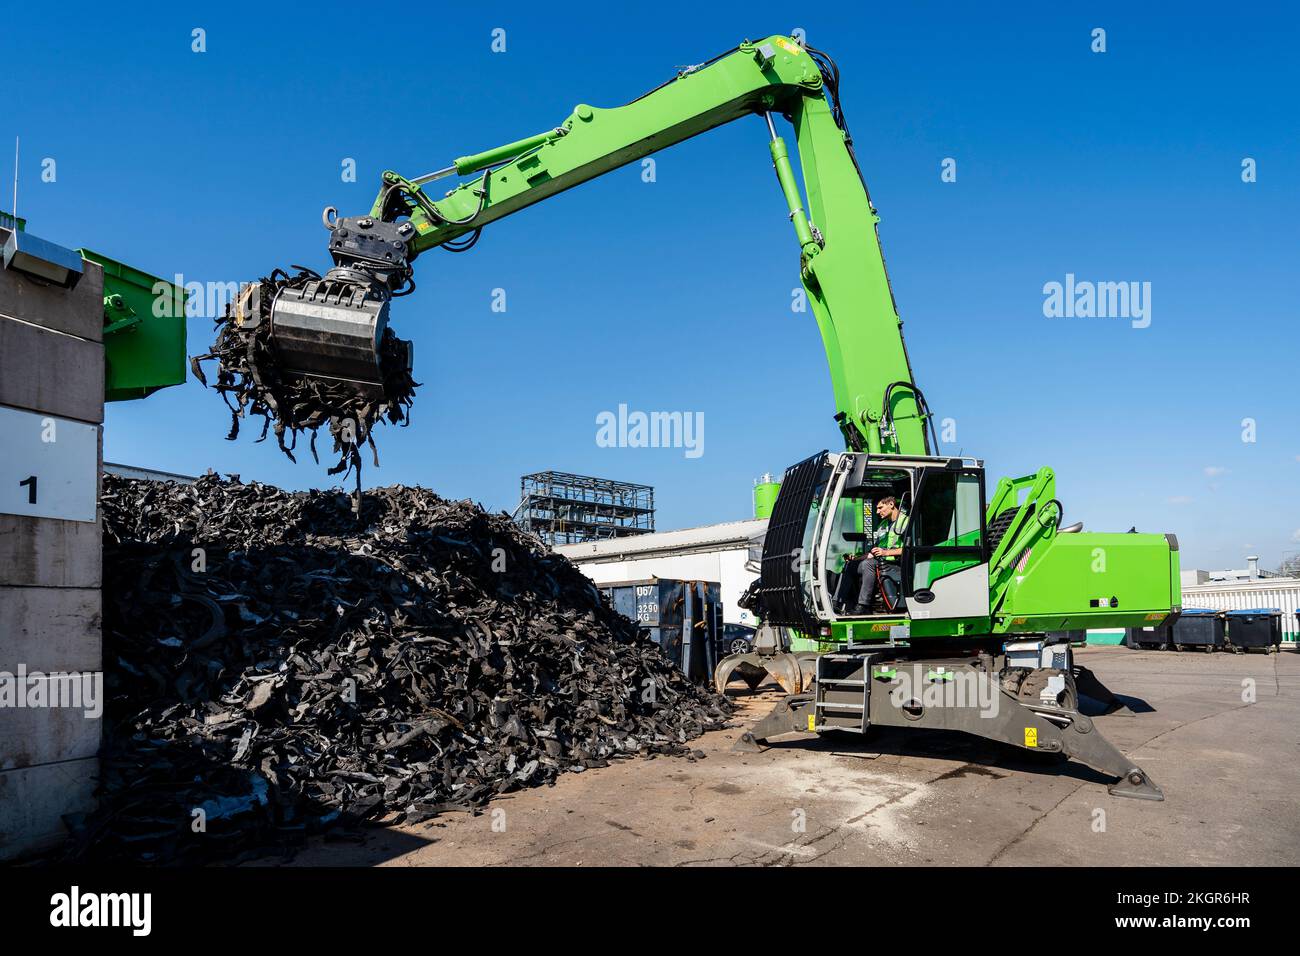 Mature man operating excavator and lifting rubber waste at recycling center Stock Photo